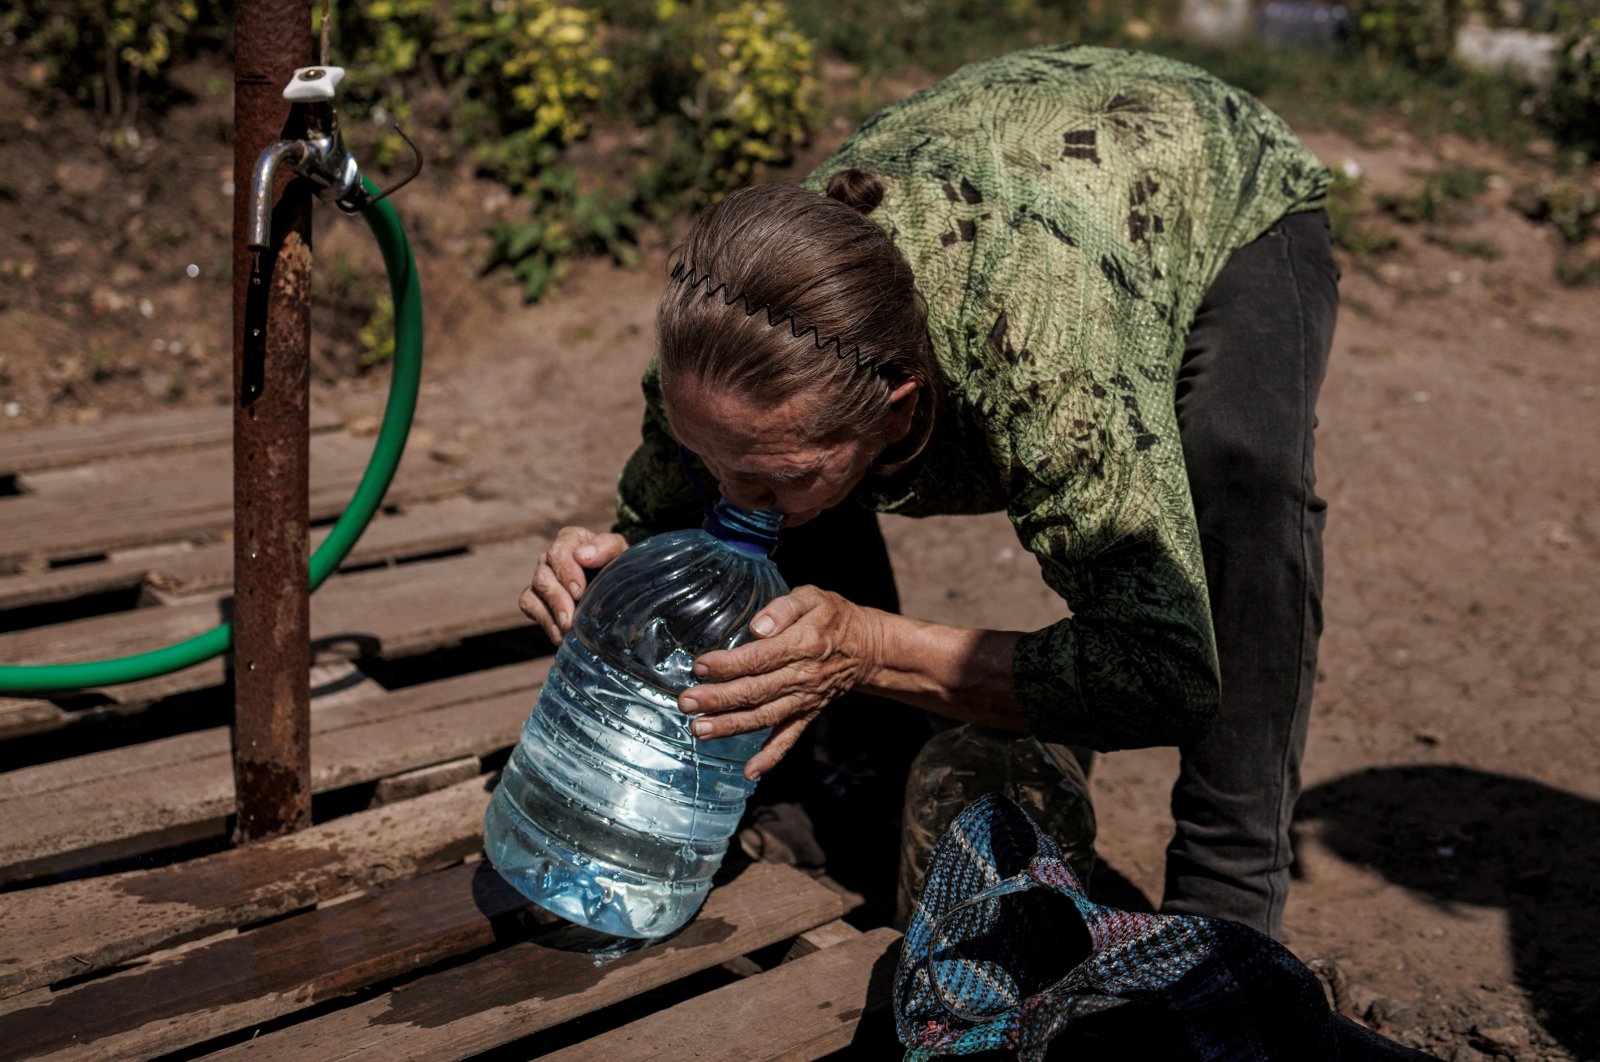 A local resident drinks clean water from a canister she just filled up, as Russia&#039;s attack on Ukraine continues, in Slovyansk, Ukraine, Aug. 7, 2022. (Reuters Photo)